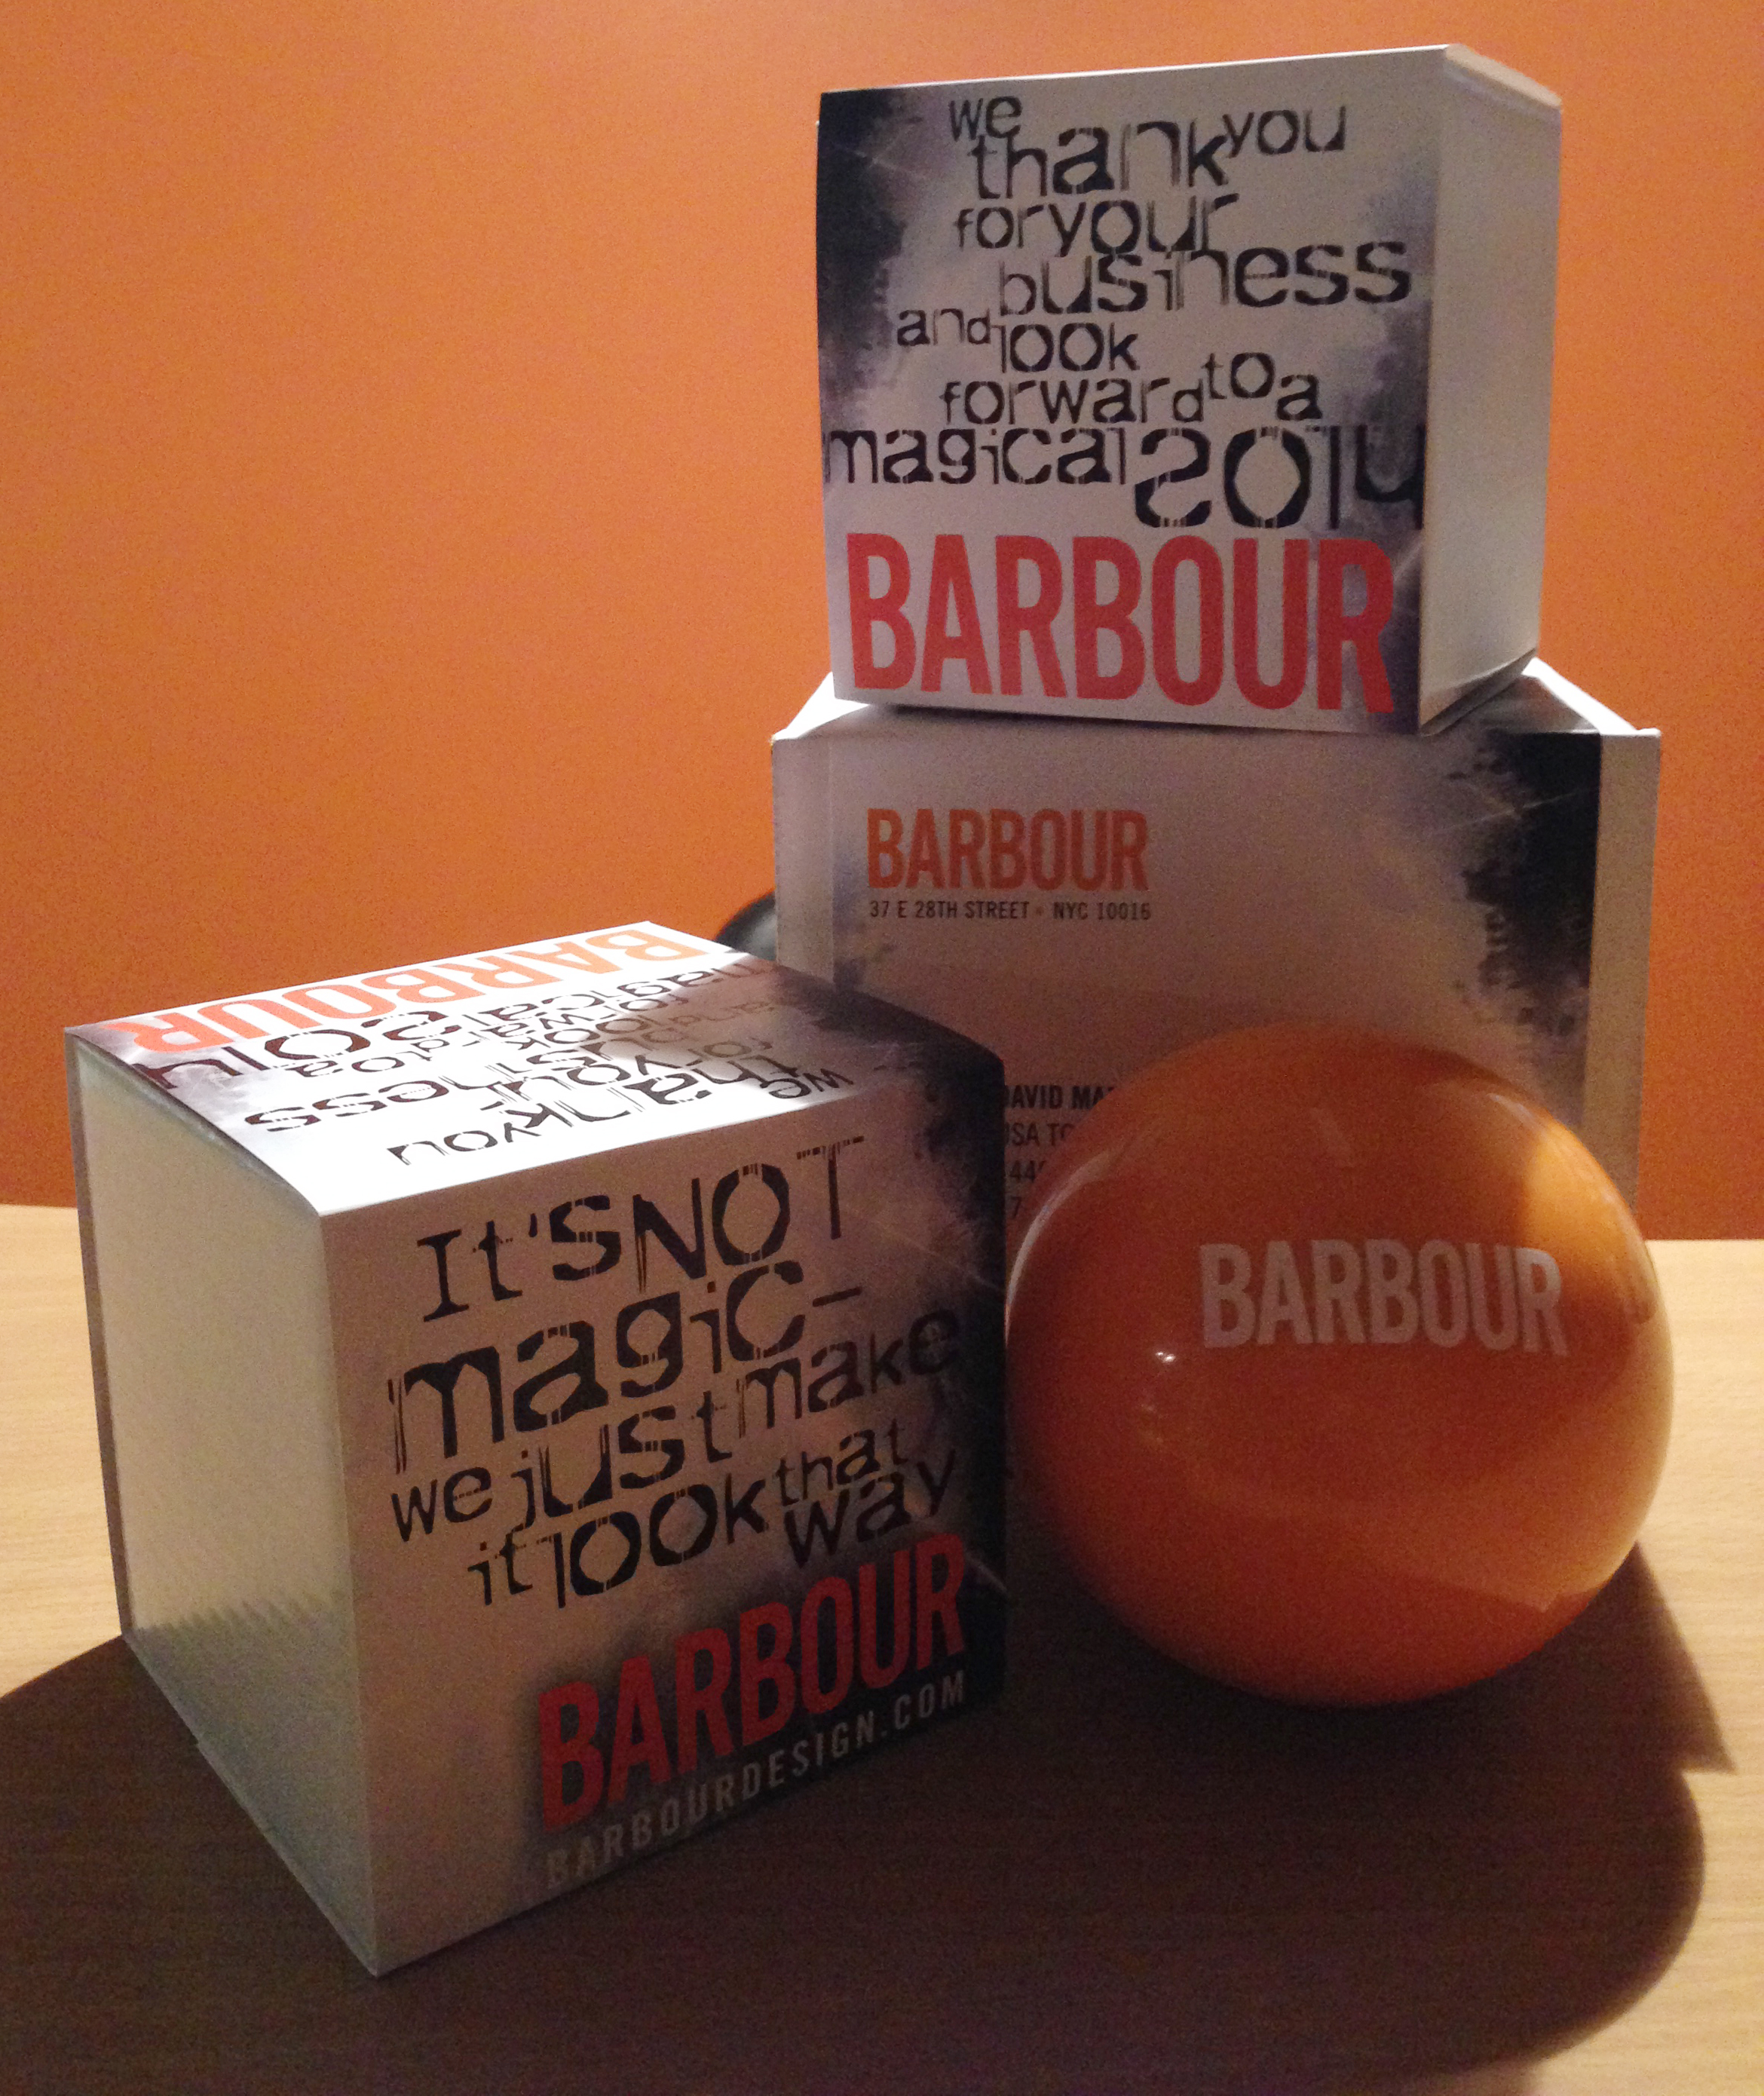 Barbour Magic 8 Ball Mailing